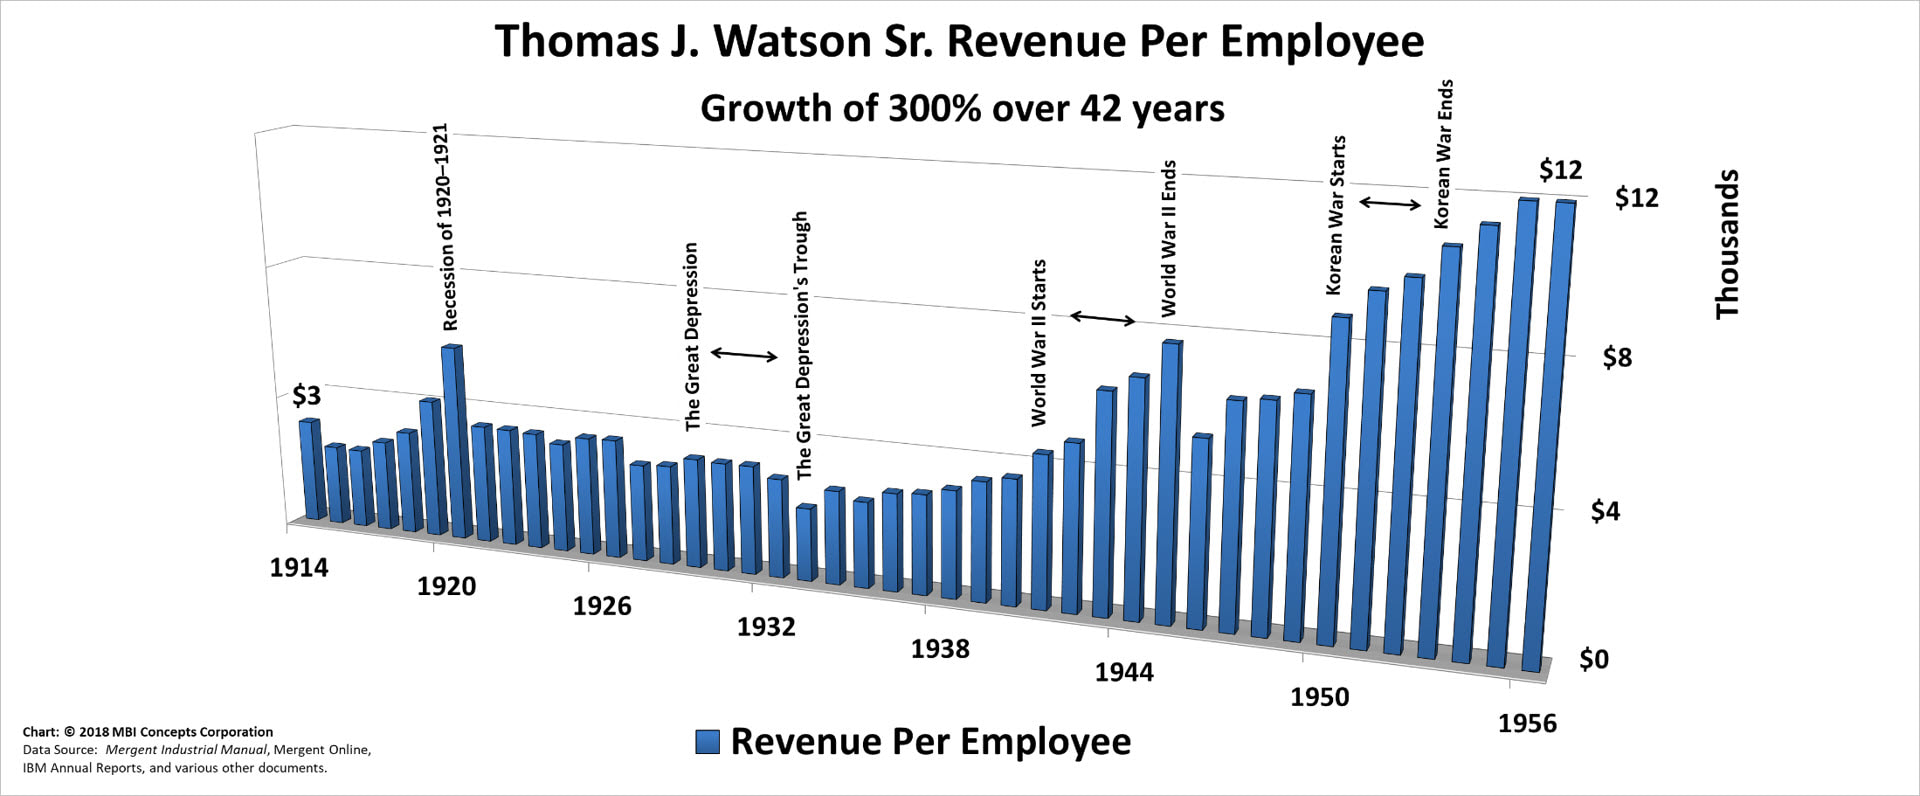 A color bar chart showing IBM's yearly revenue revenue per employee (sales productivity) from 1915 through 1956 for Thomas J. (Tom) Watson Sr.